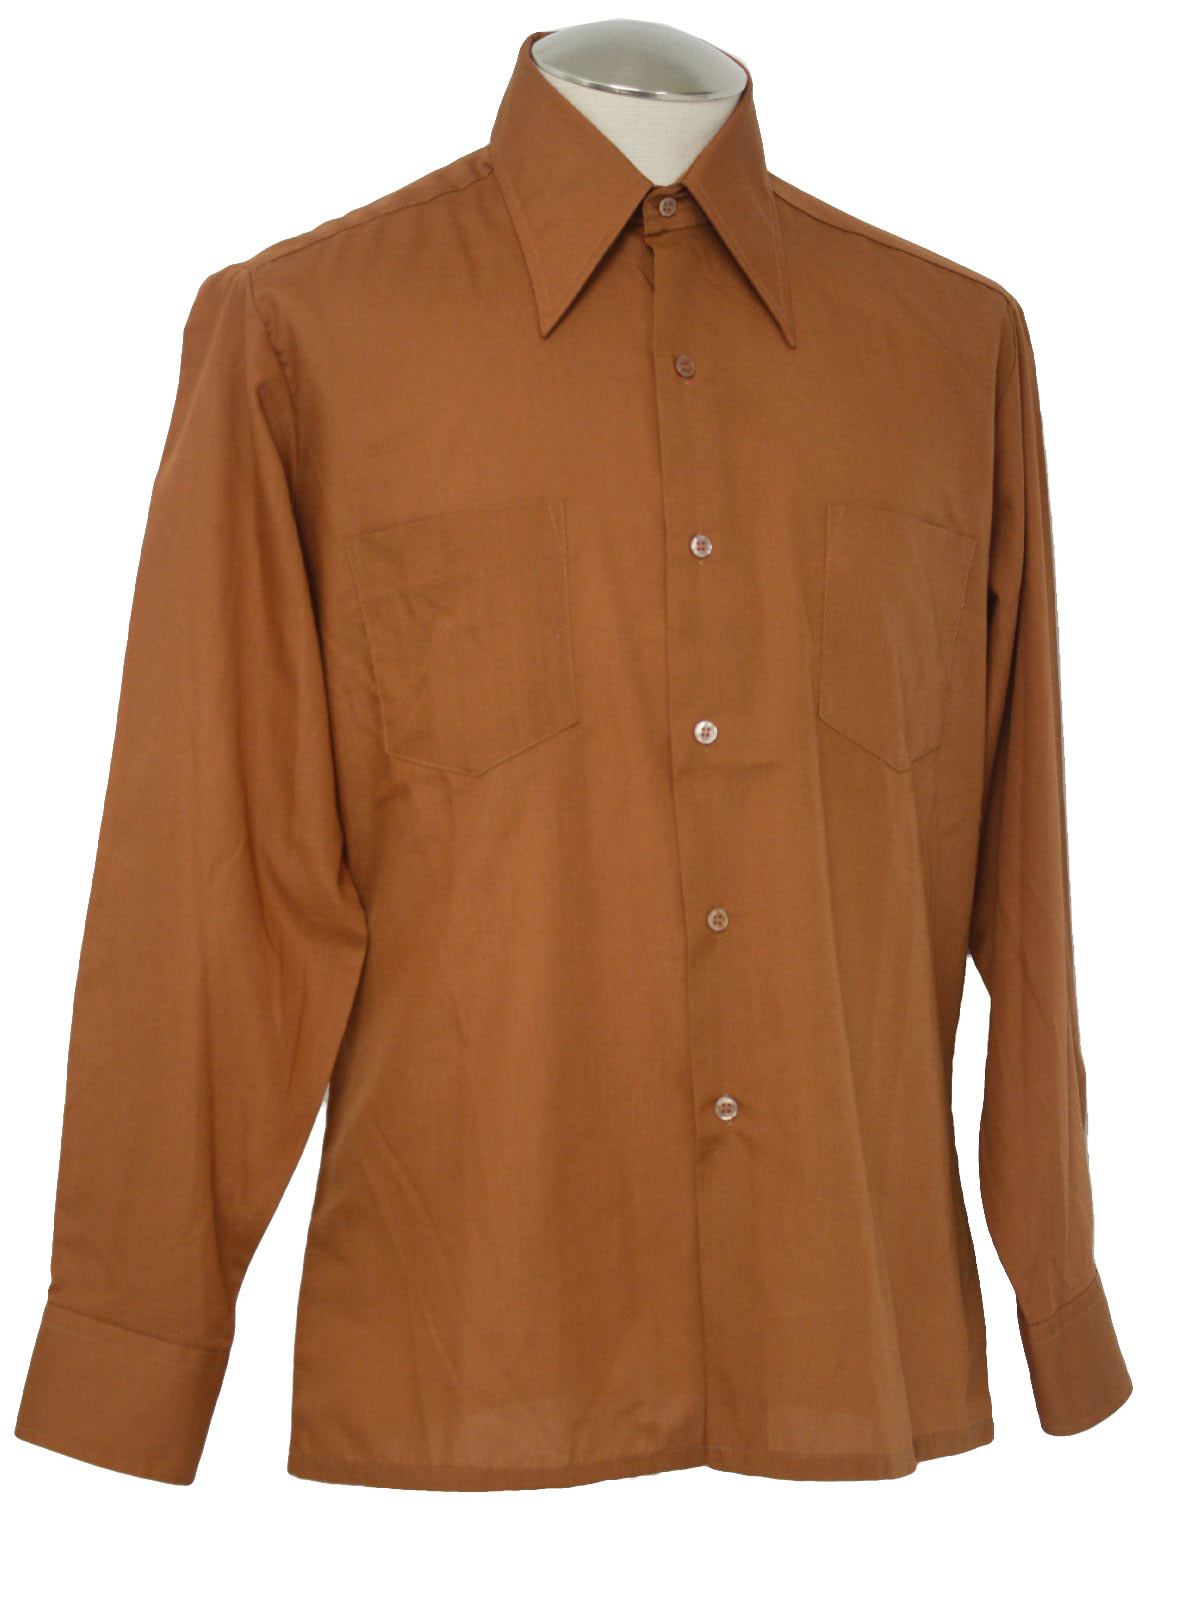 Vintage 1970's Shirt: 70s -JC Penney- Mens terracotta cotton and ...